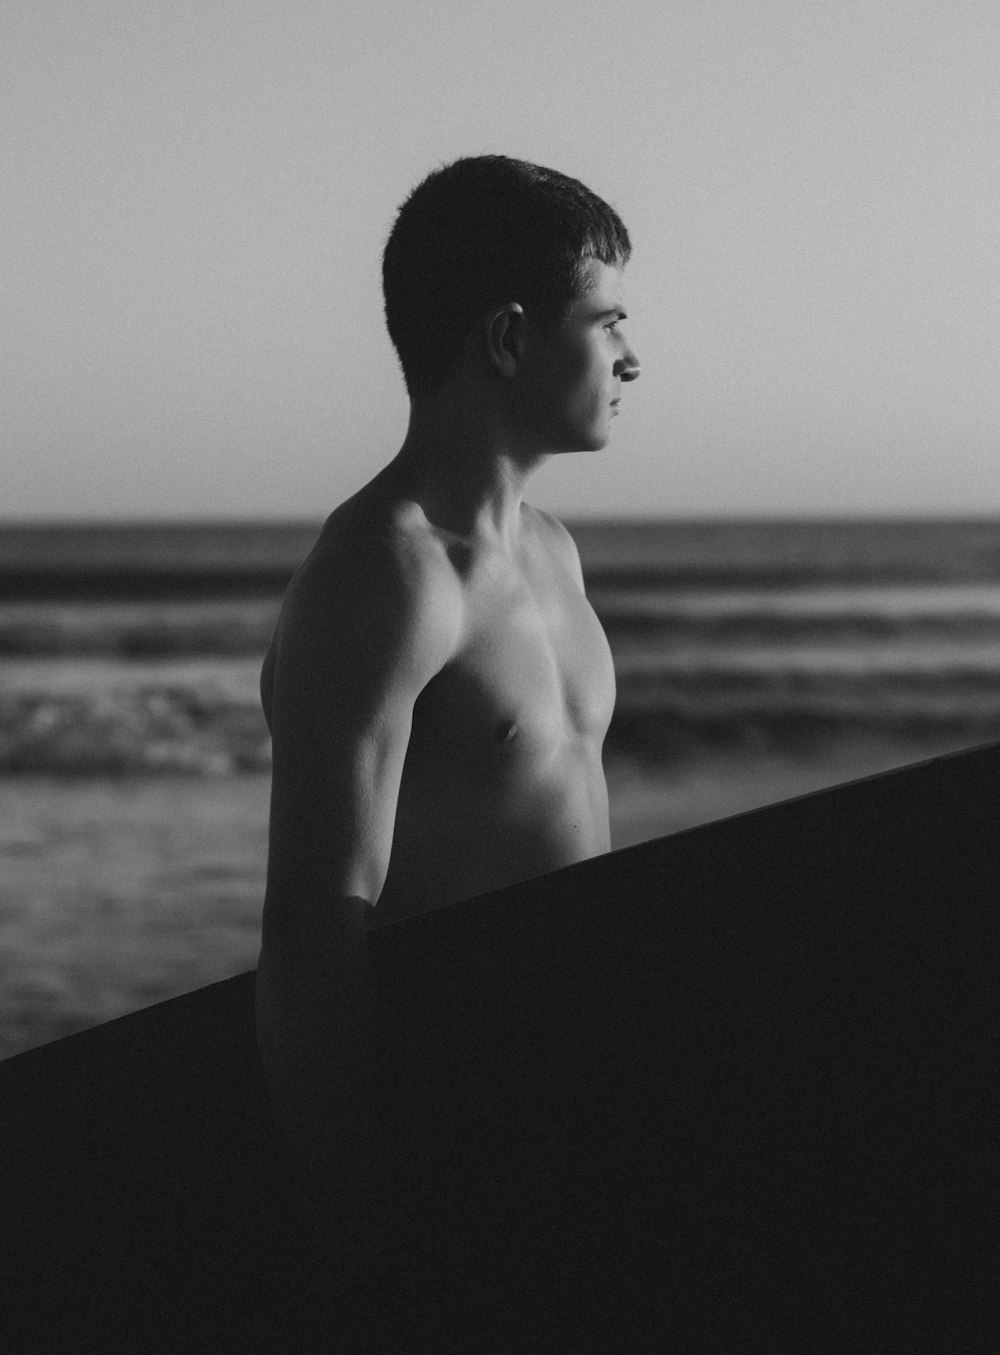 a black and white photo of a man holding a surfboard